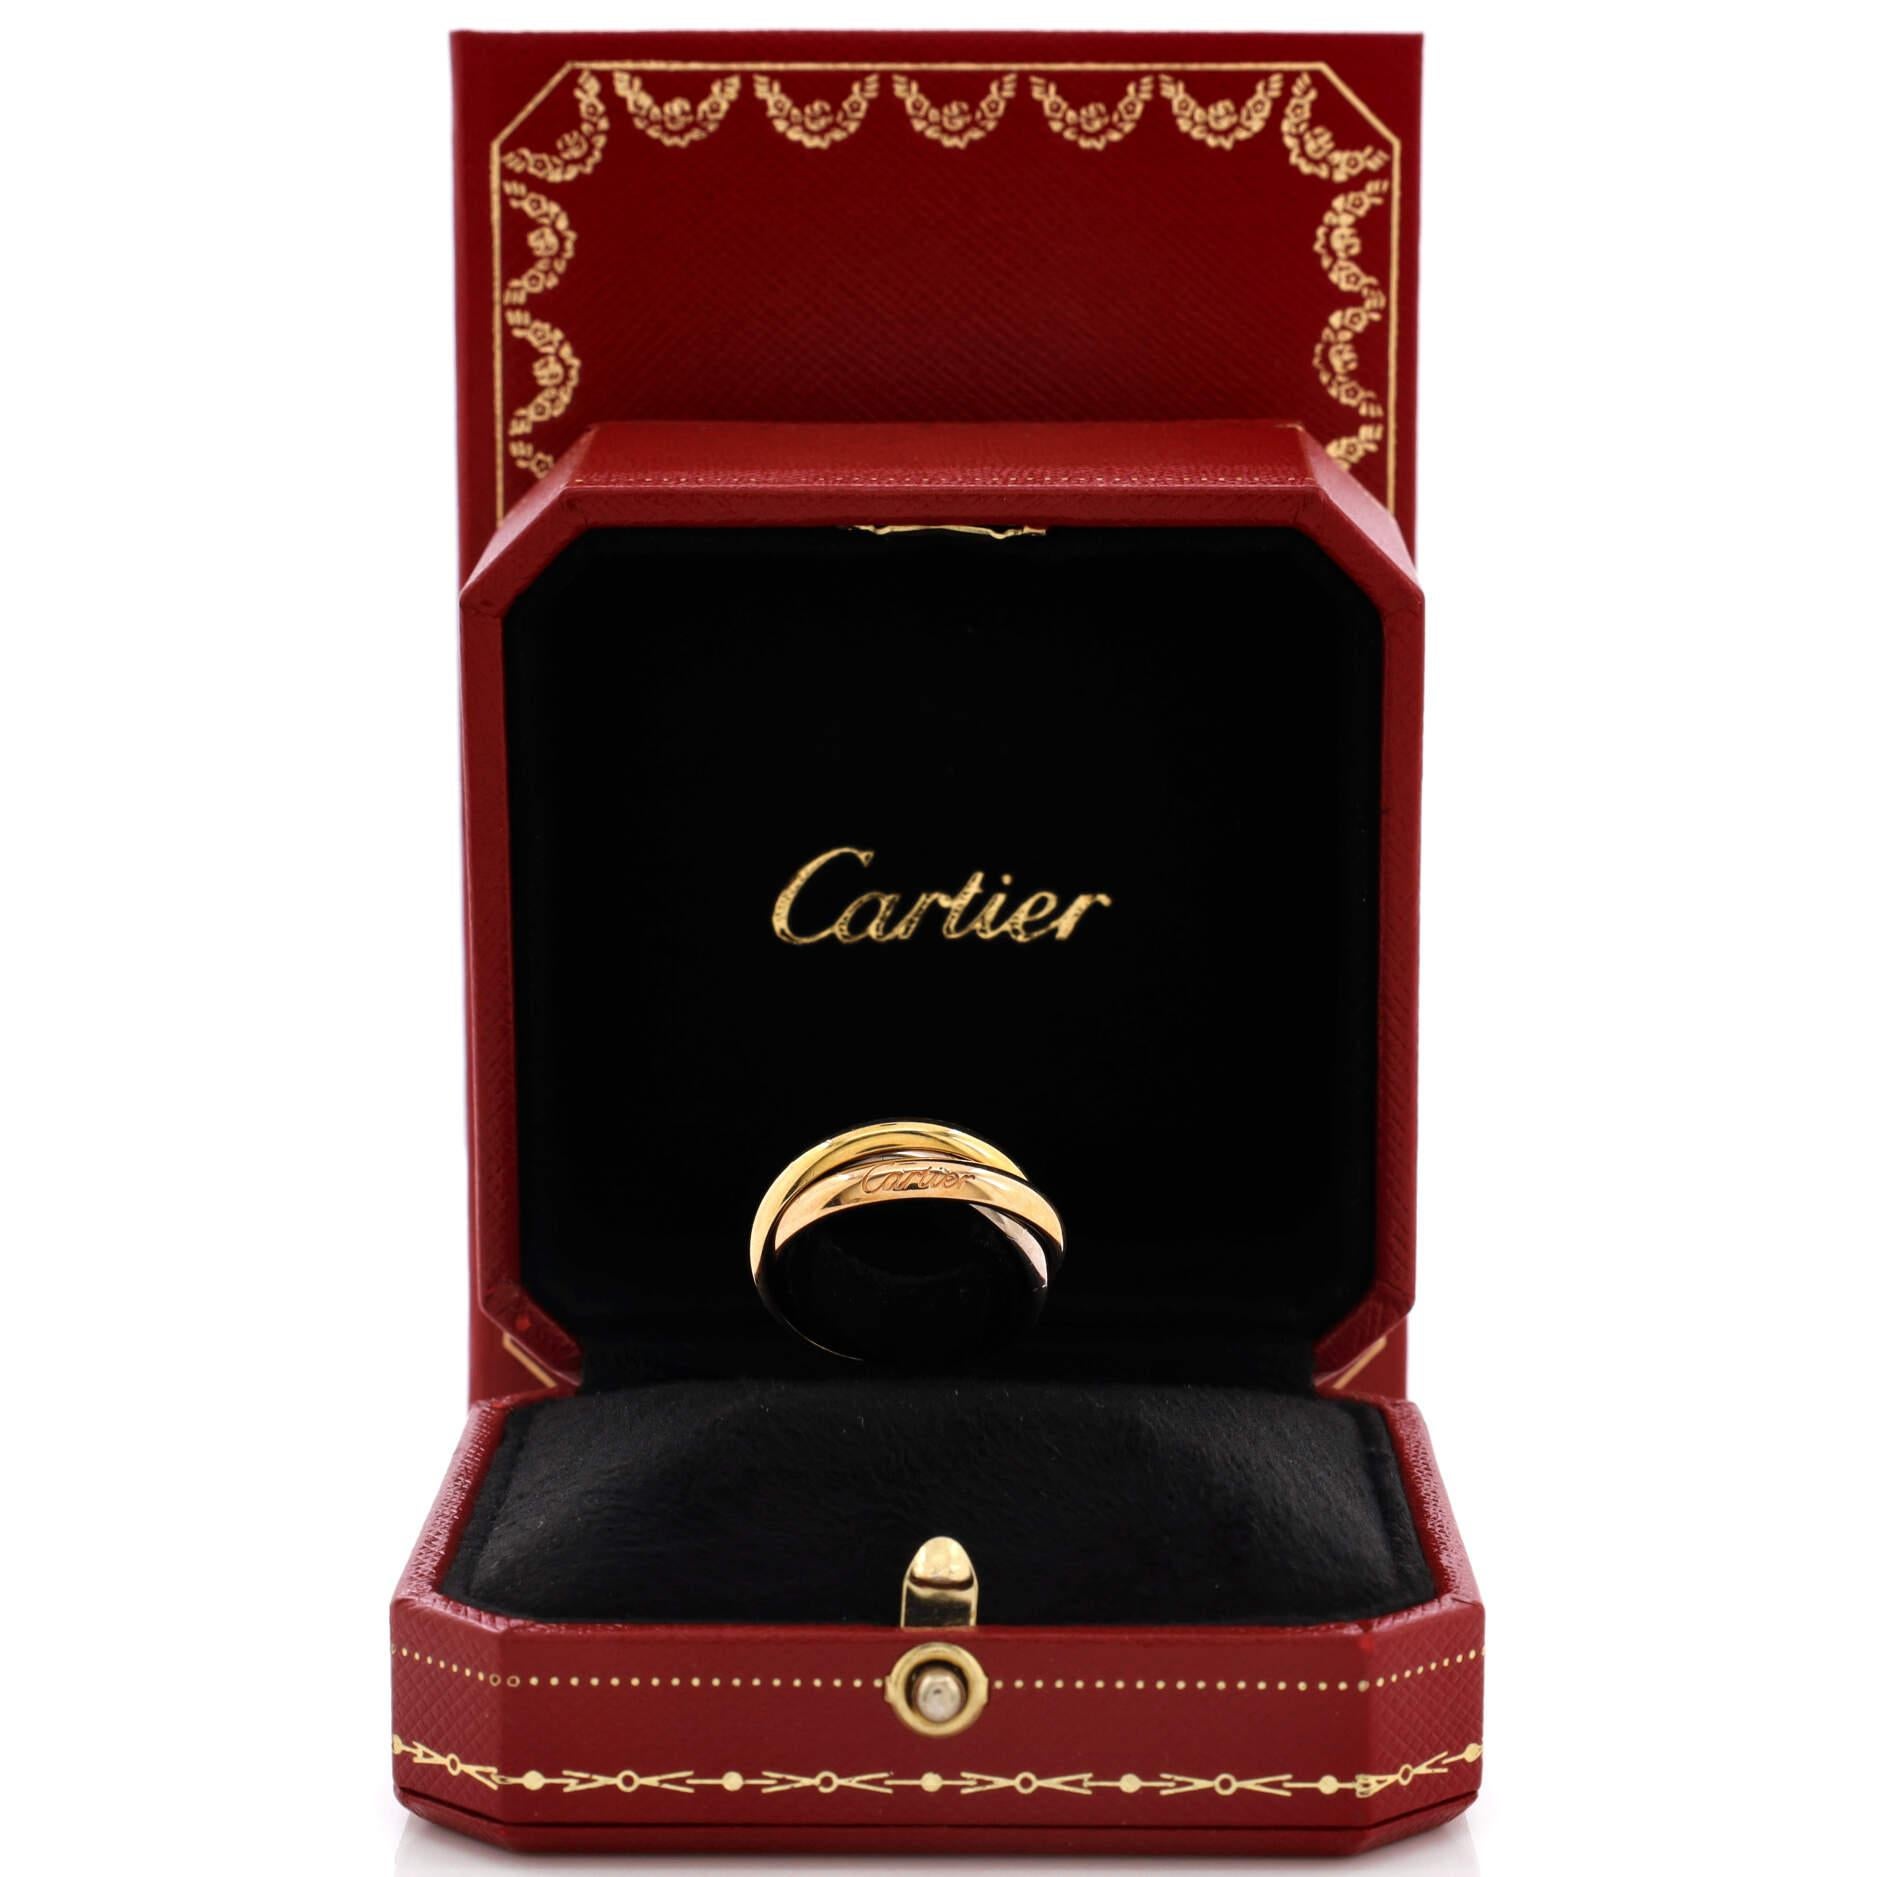 Condition: Great. Minor wear throughout.
Accessories: No Accessories
Measurements: Size: 8 - 57, Width: 3.50 mm
Designer: Cartier
Model: Trinity Ring 18K Tricolor Gold Medium
Exterior Color: Tricolor Gold
Item Number: 212455/1